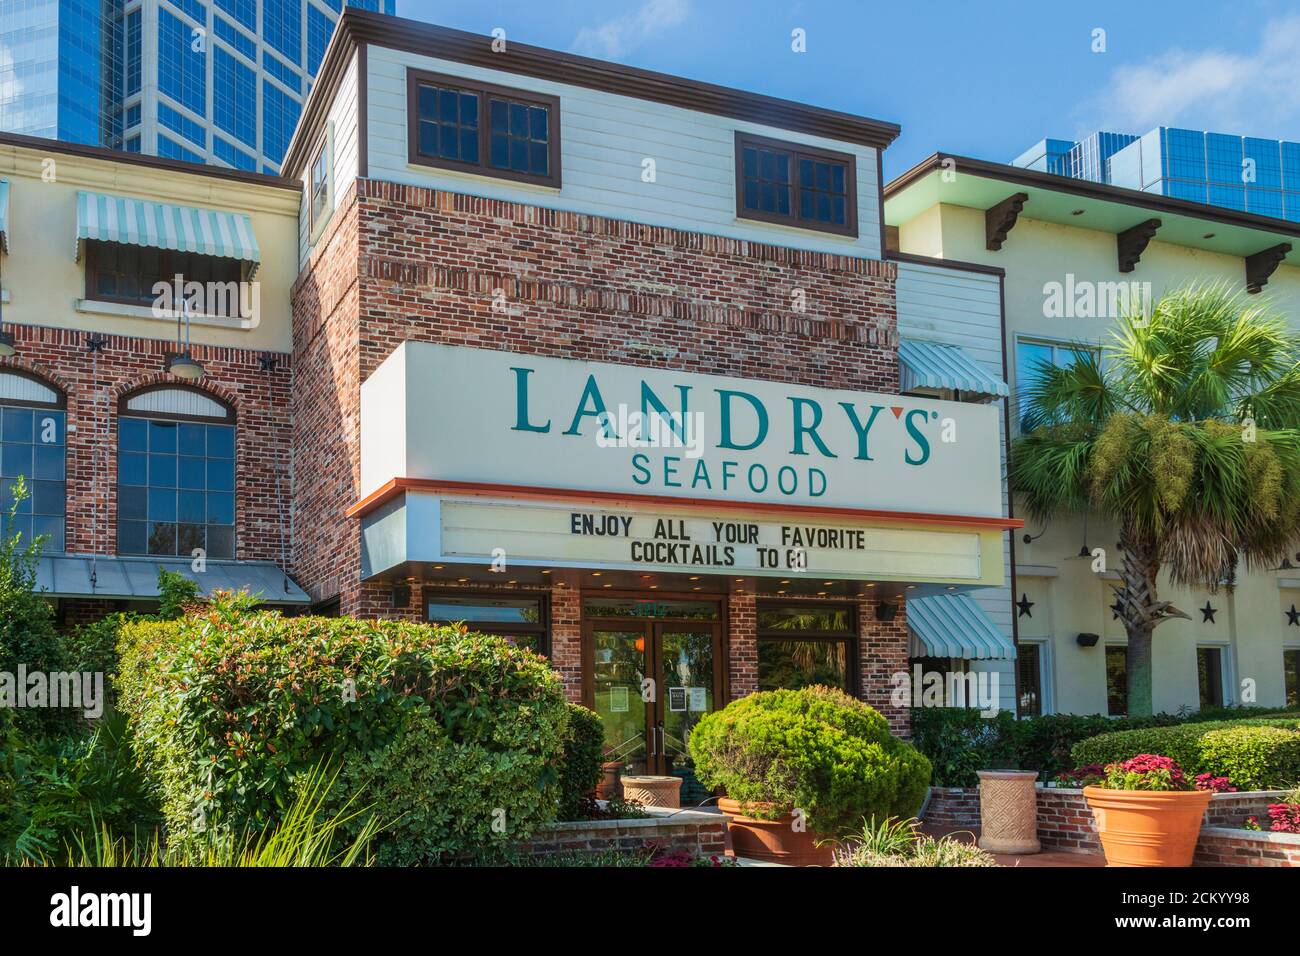 Landry's Seafood Restaurant in The Woodlands, Texas. Stockfoto